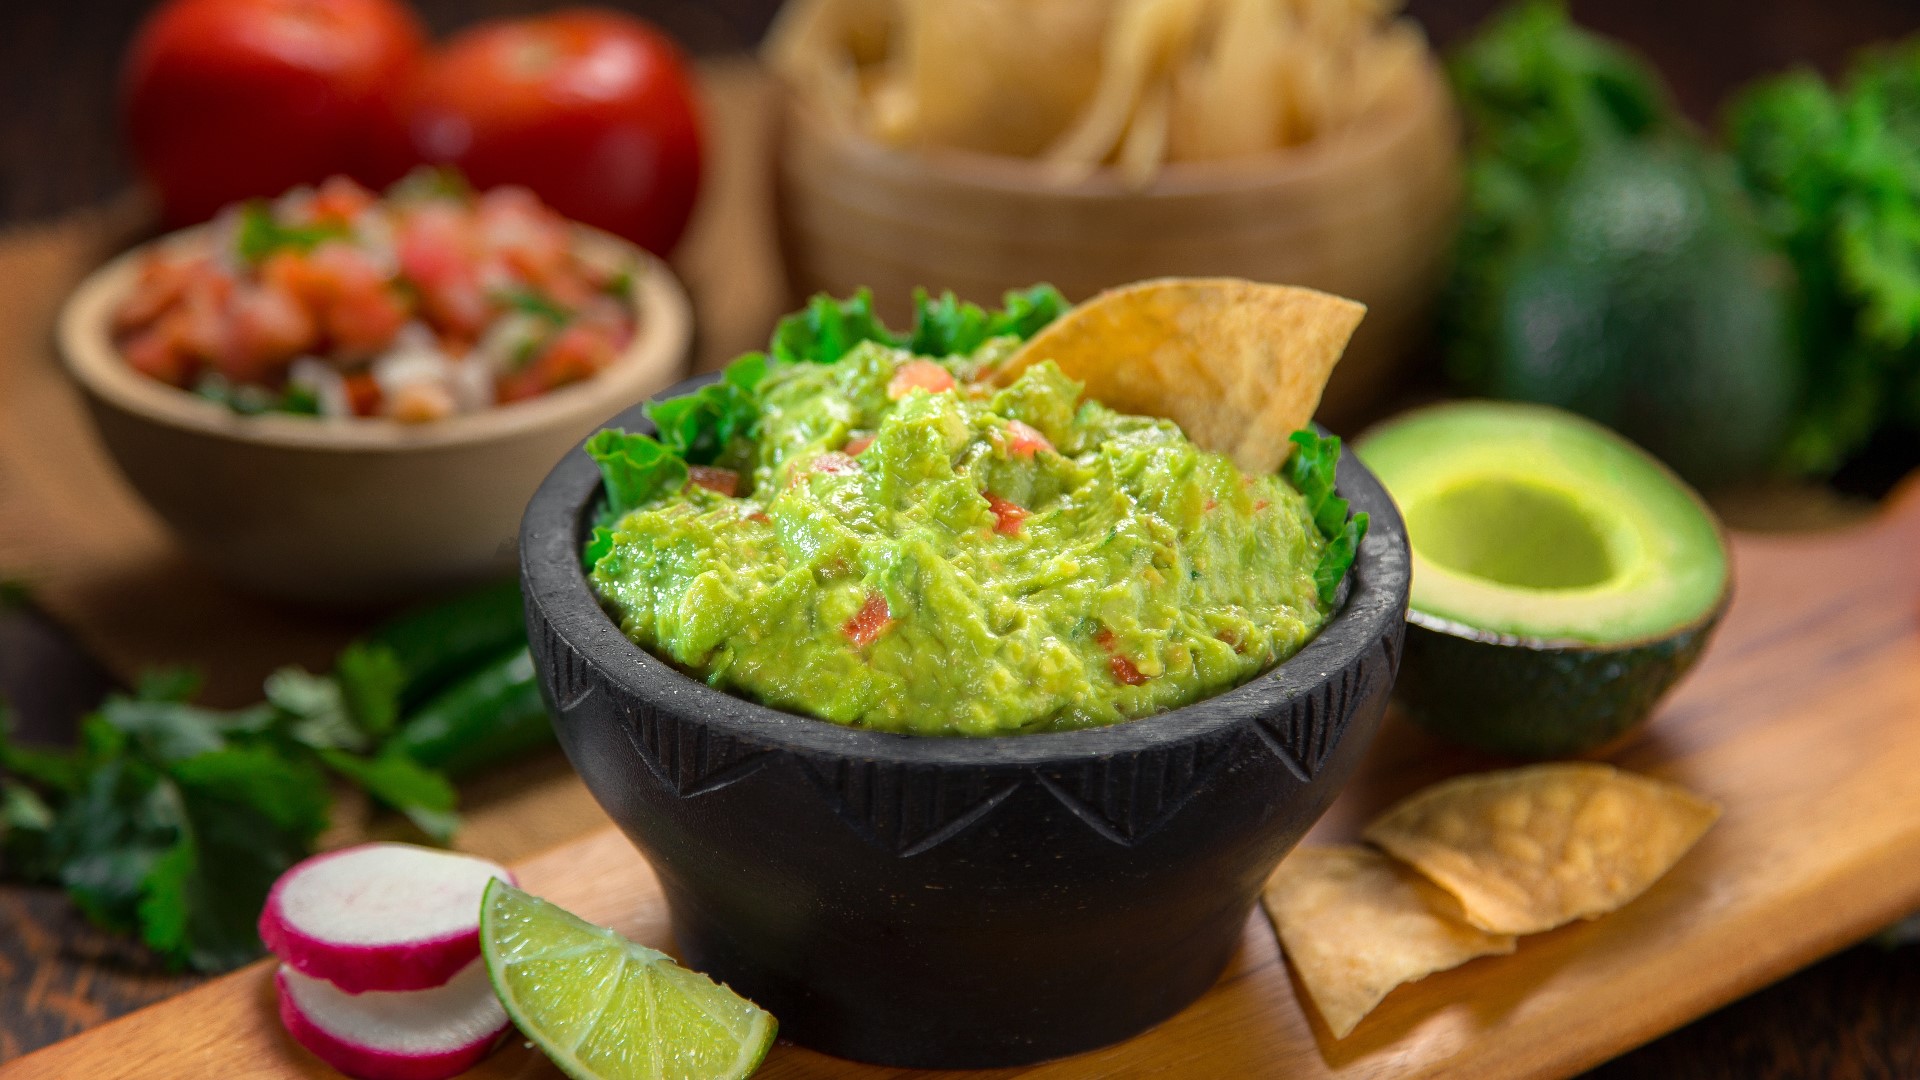 Chef David Matern of Nada in North Bethesda's Pike and Rose shows us easy tips on how to make the best guacamole.